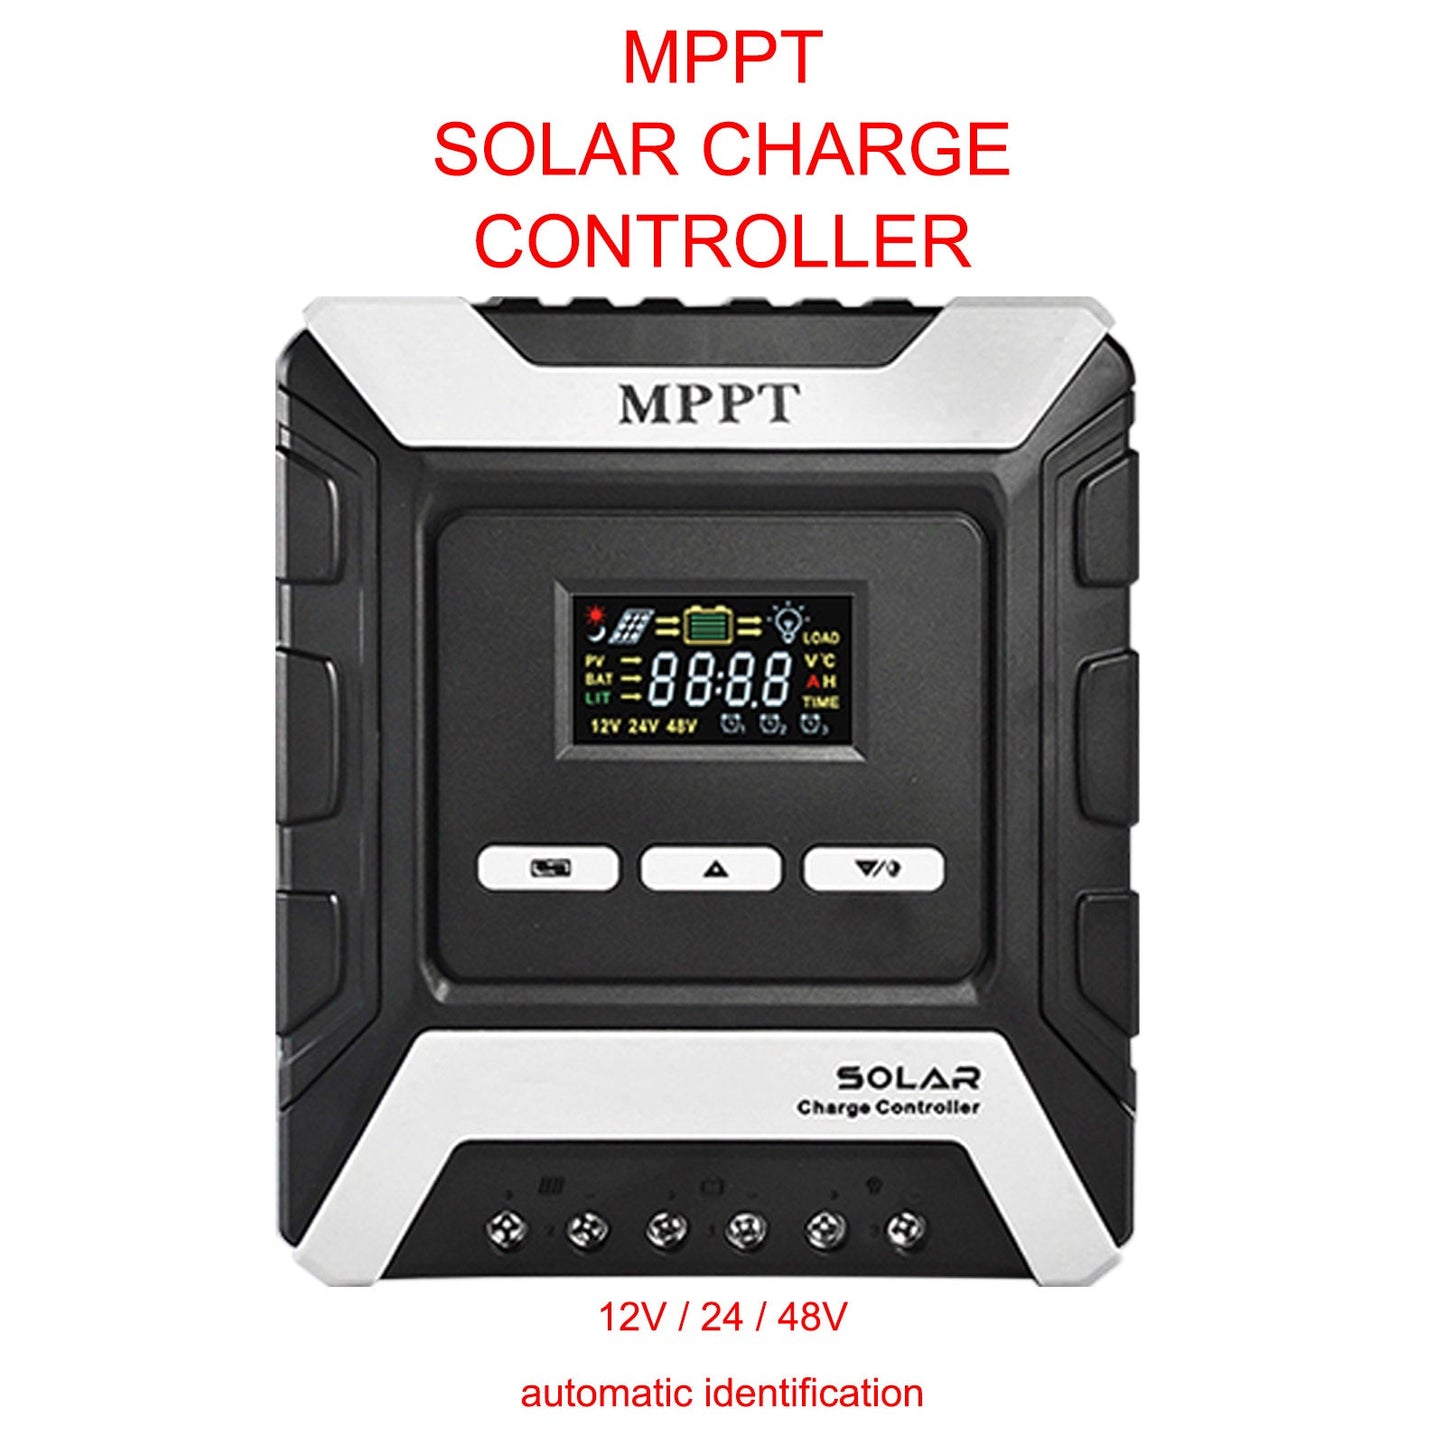 20A MPPT AUTO Solar Charge Controller Charger 12V/24V/48V with Color LCD Display